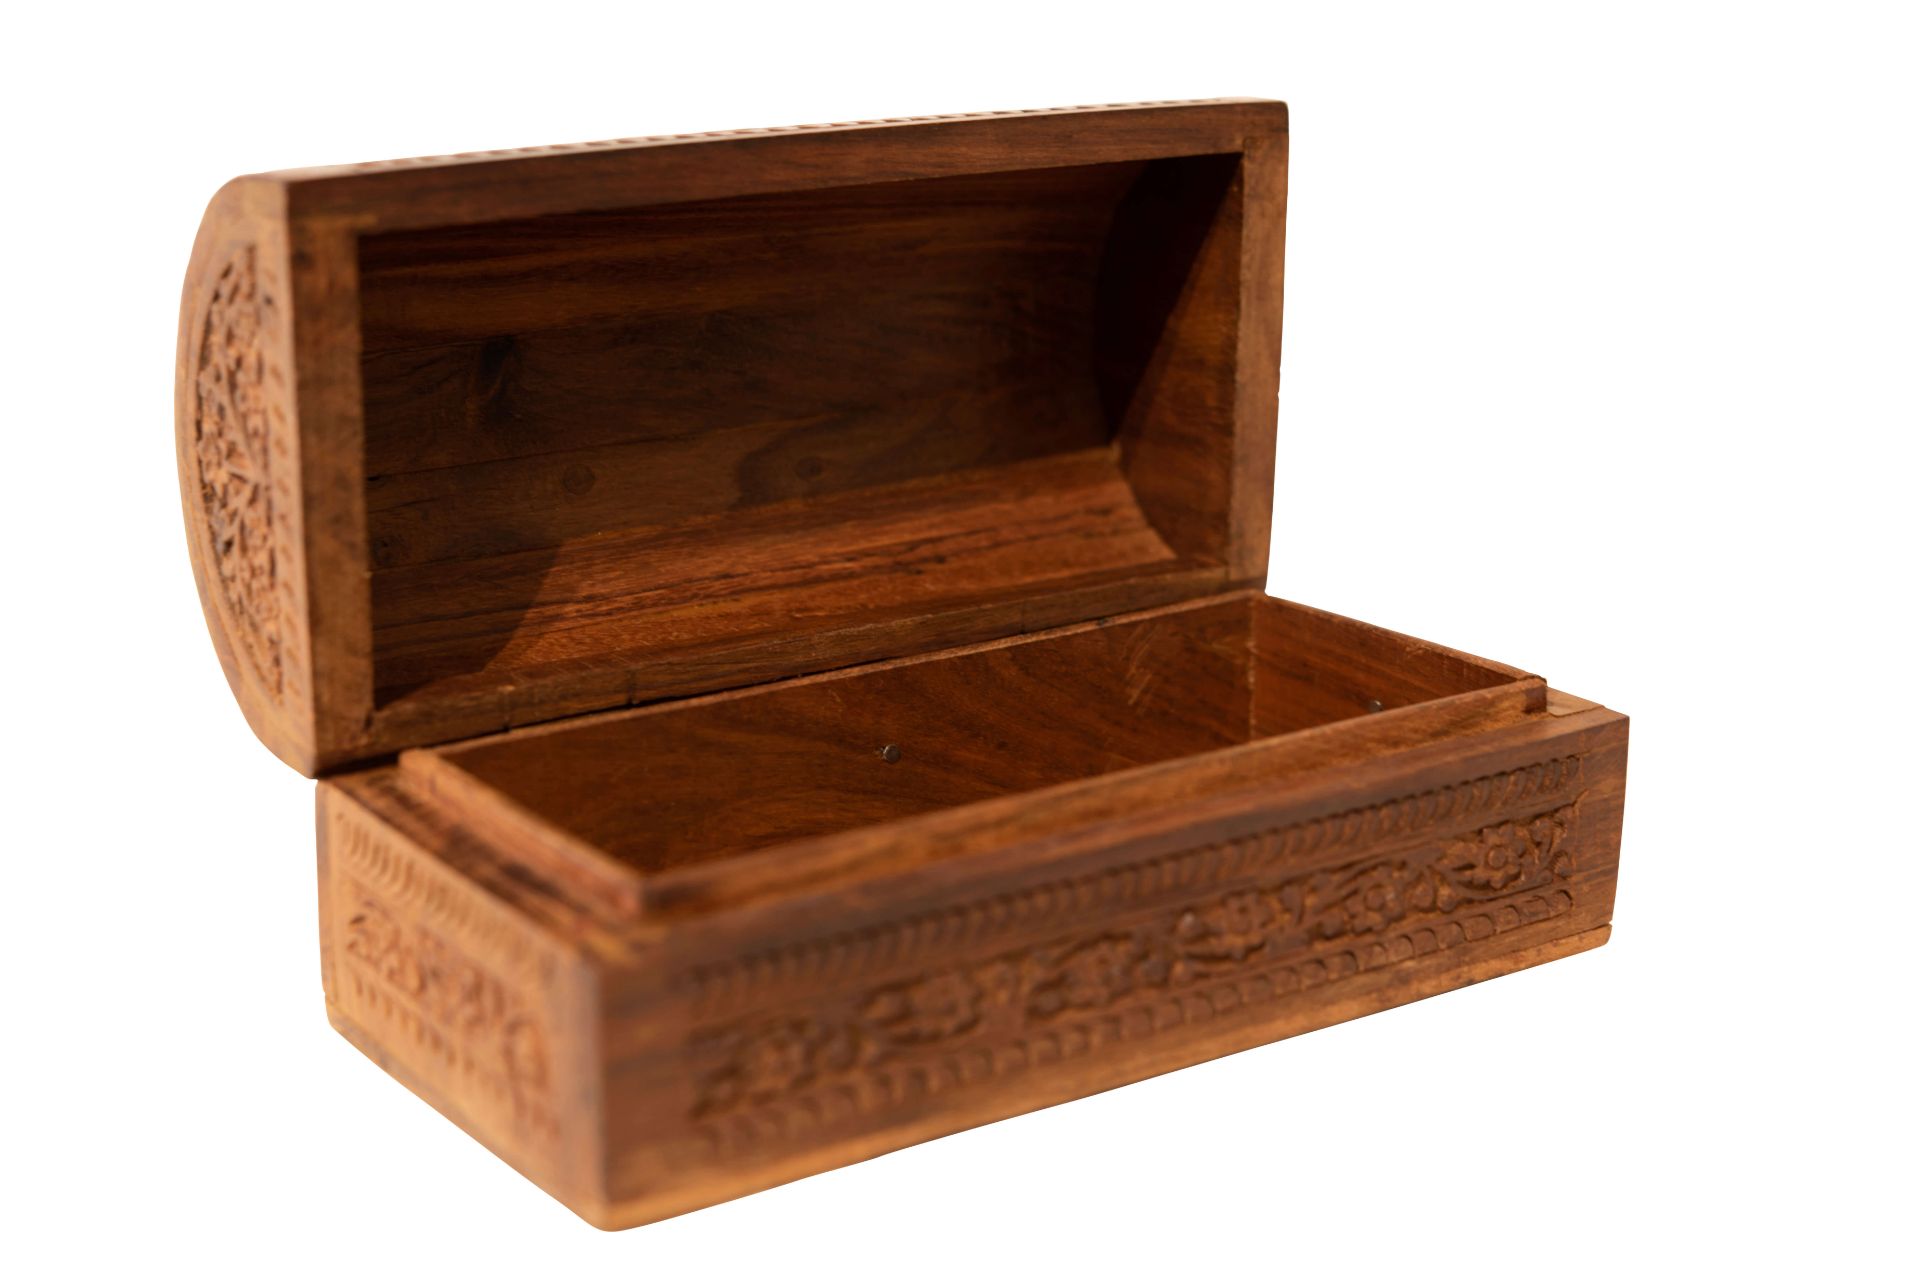 Holzkiste aus Rosenholz Asiatische Schnitzmotive | Rosewood Box with Carved Asian Motifs - Image 3 of 5